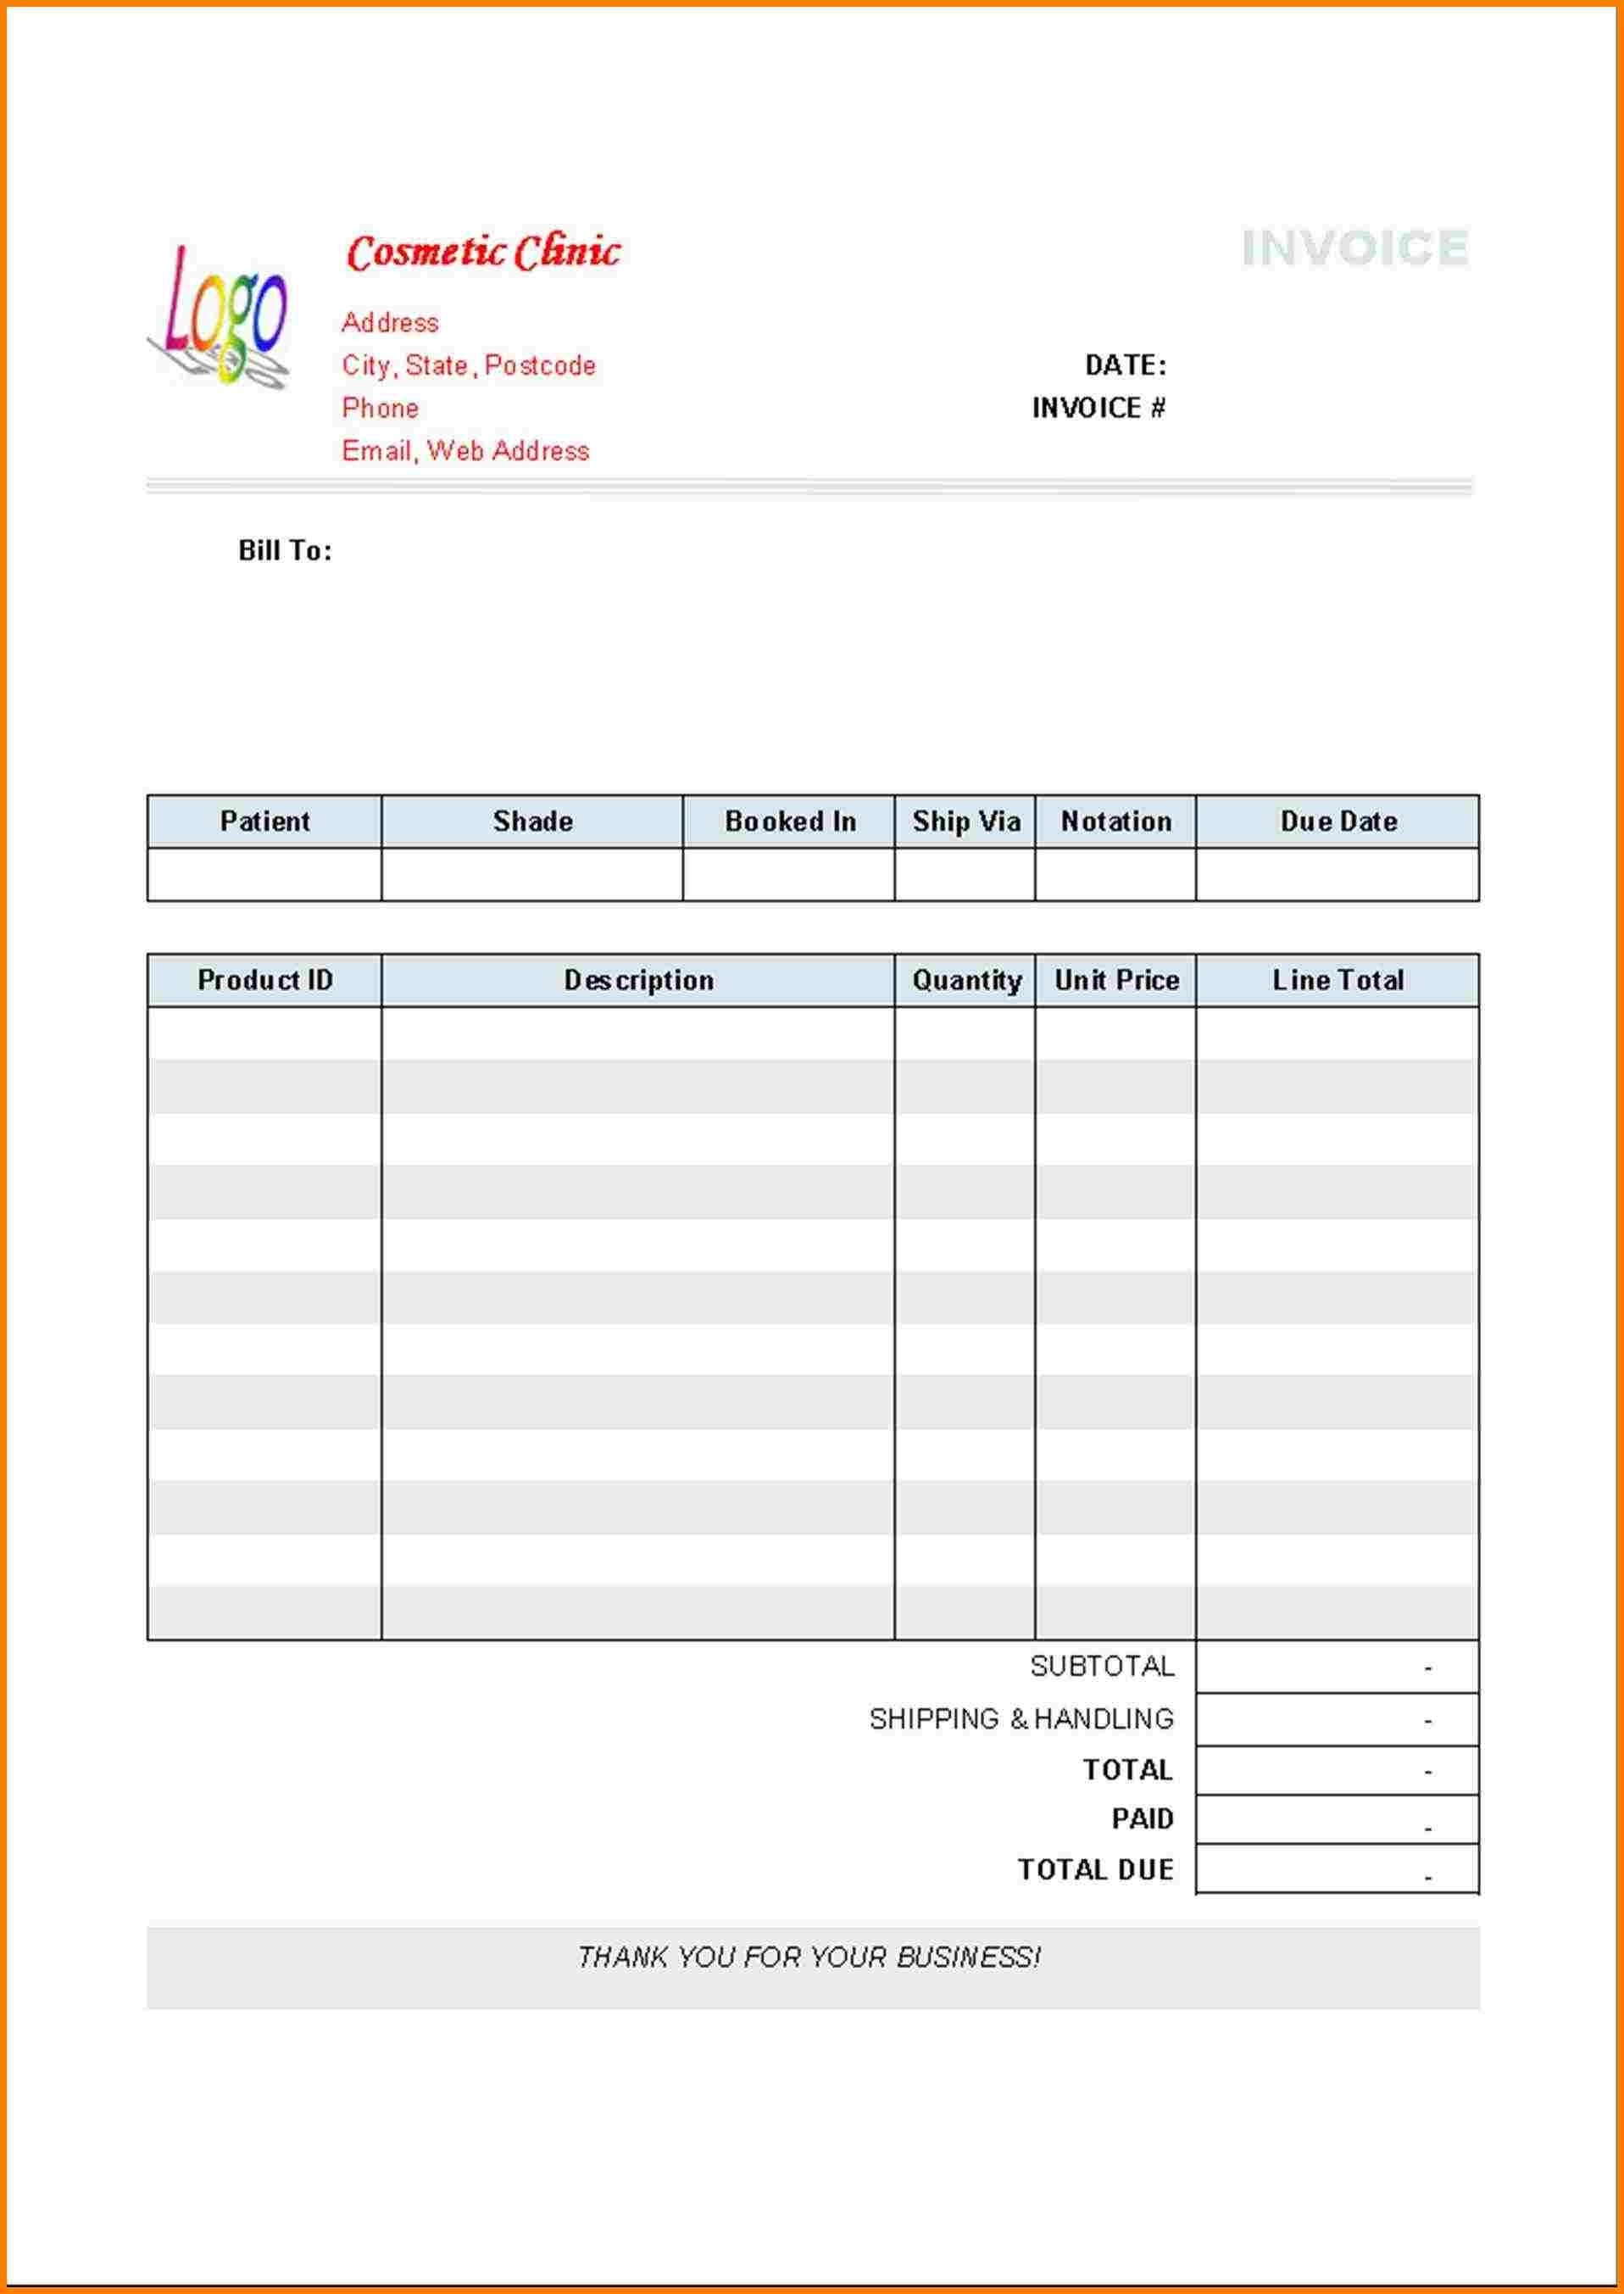 10+ Australian Tax Invoice Template Excel | Support Our Revolution ...